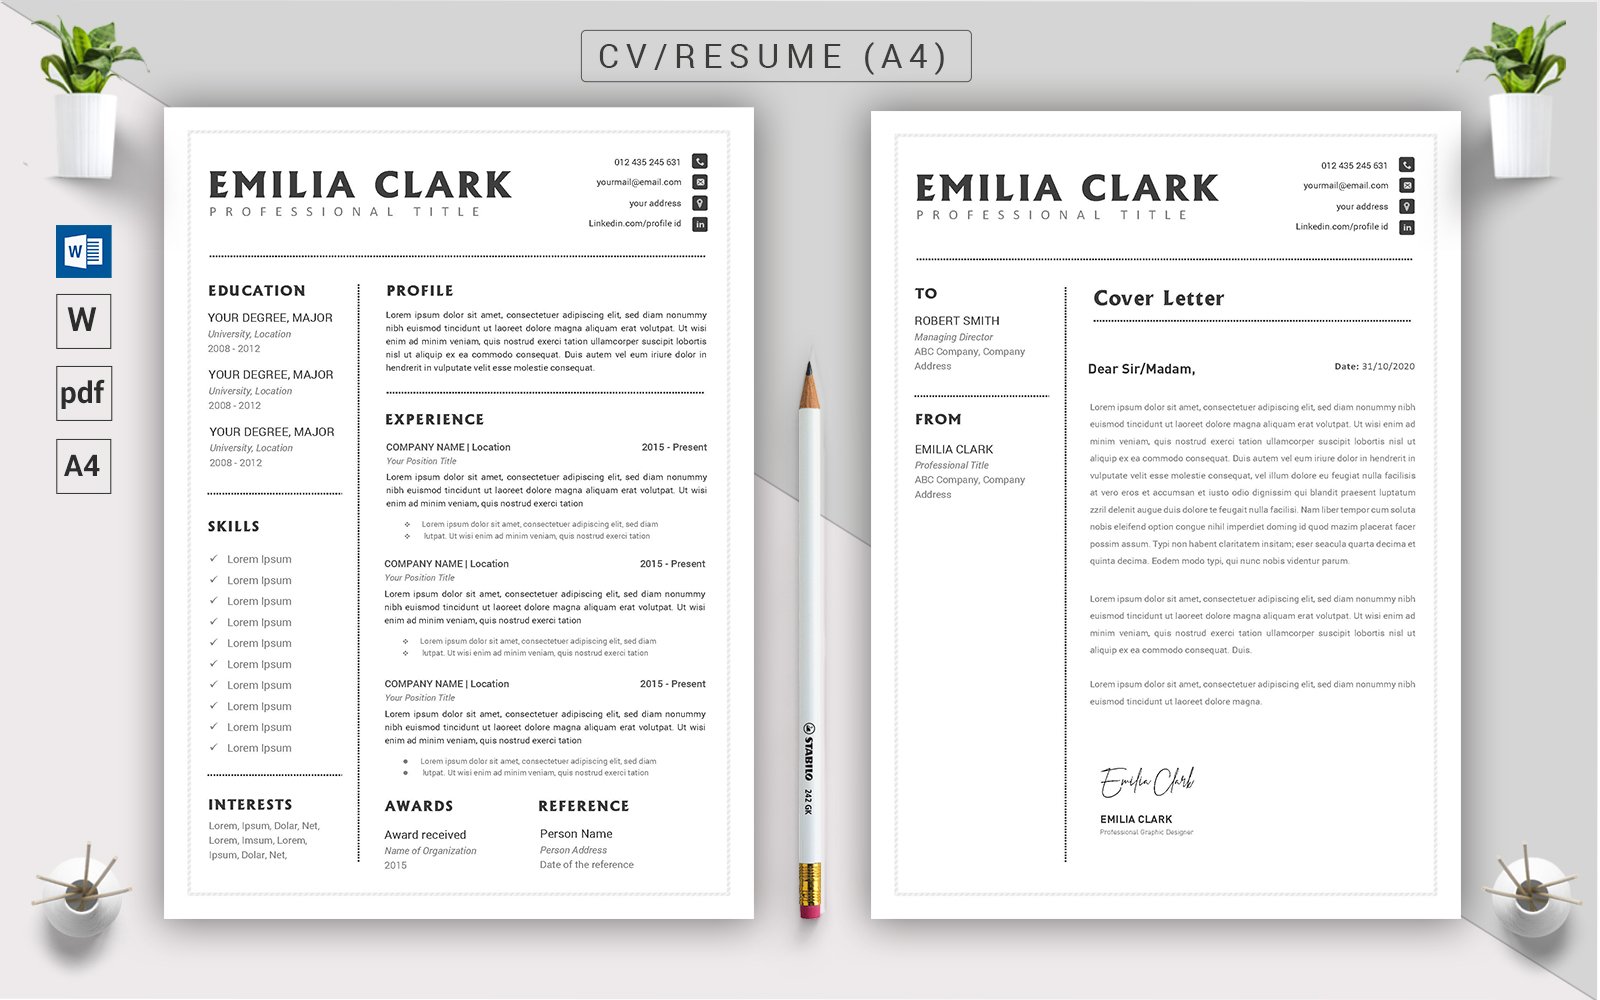 CV Resume Word Docx Template preview image.